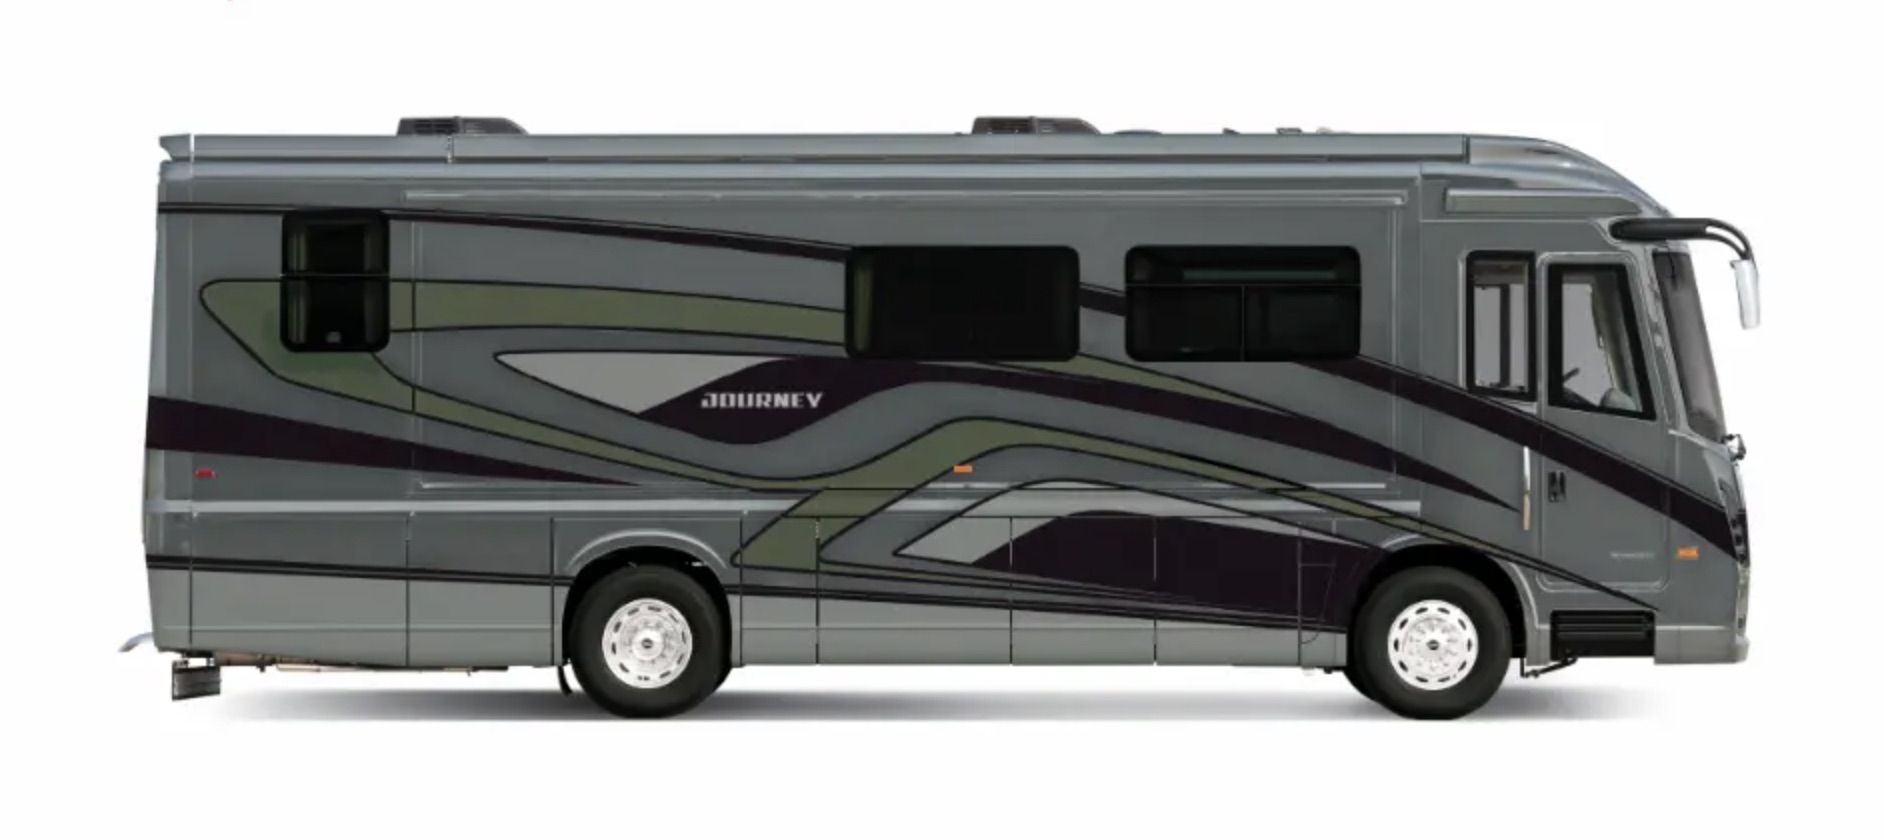 Luxury RVs Fit for the President - RV.com